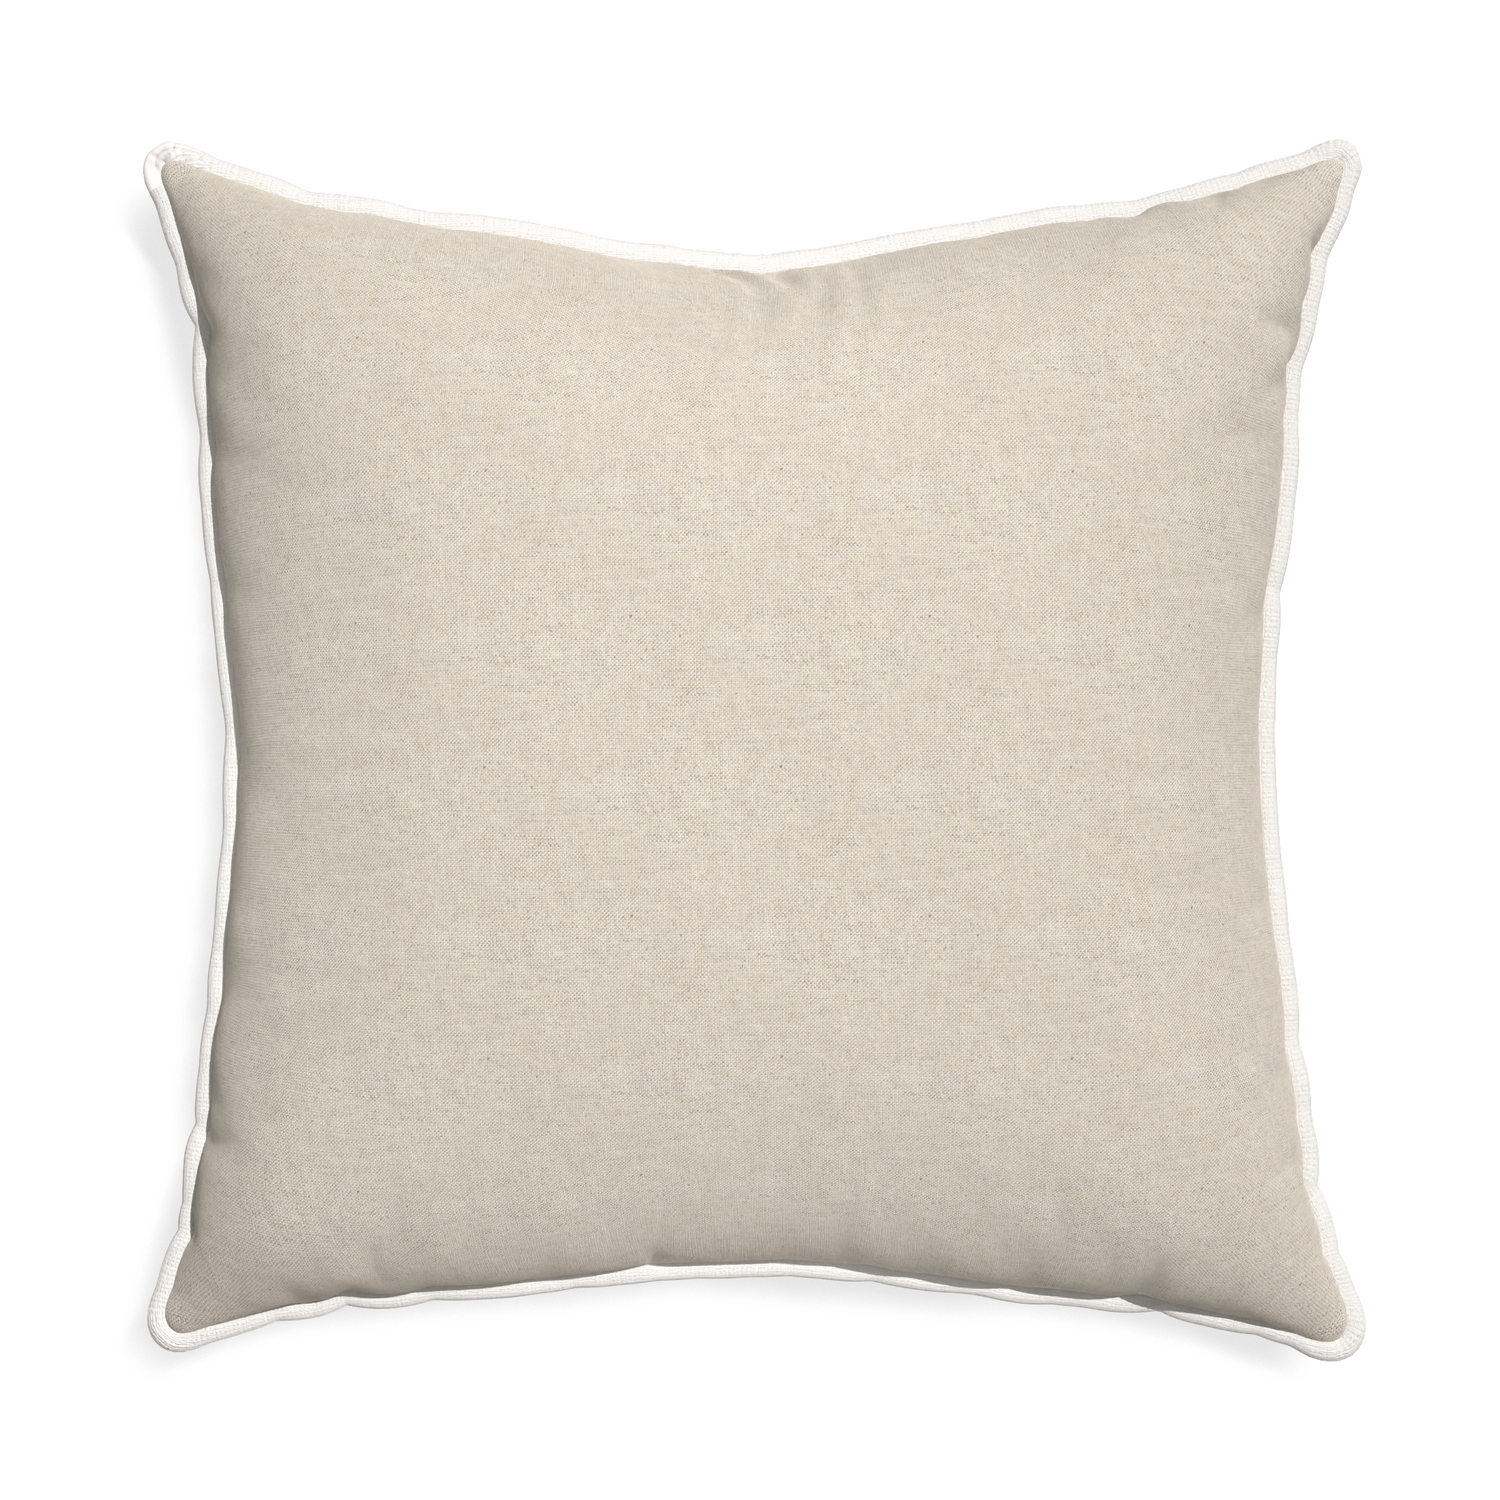 Euro-sham oat custom light brownpillow with snow piping on white background